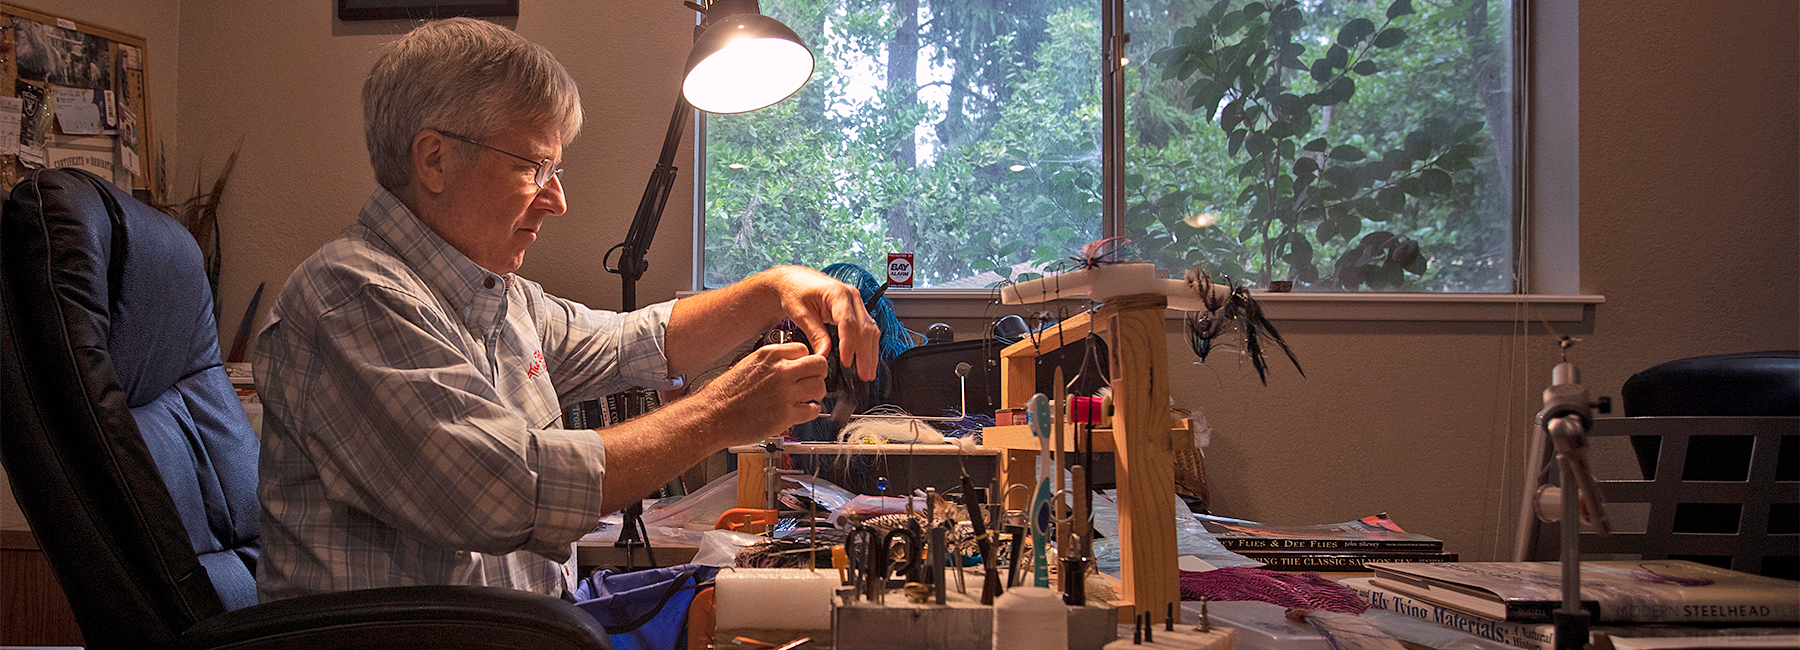 Choosing Your Next Fly Tying Vise - The Fly Shop